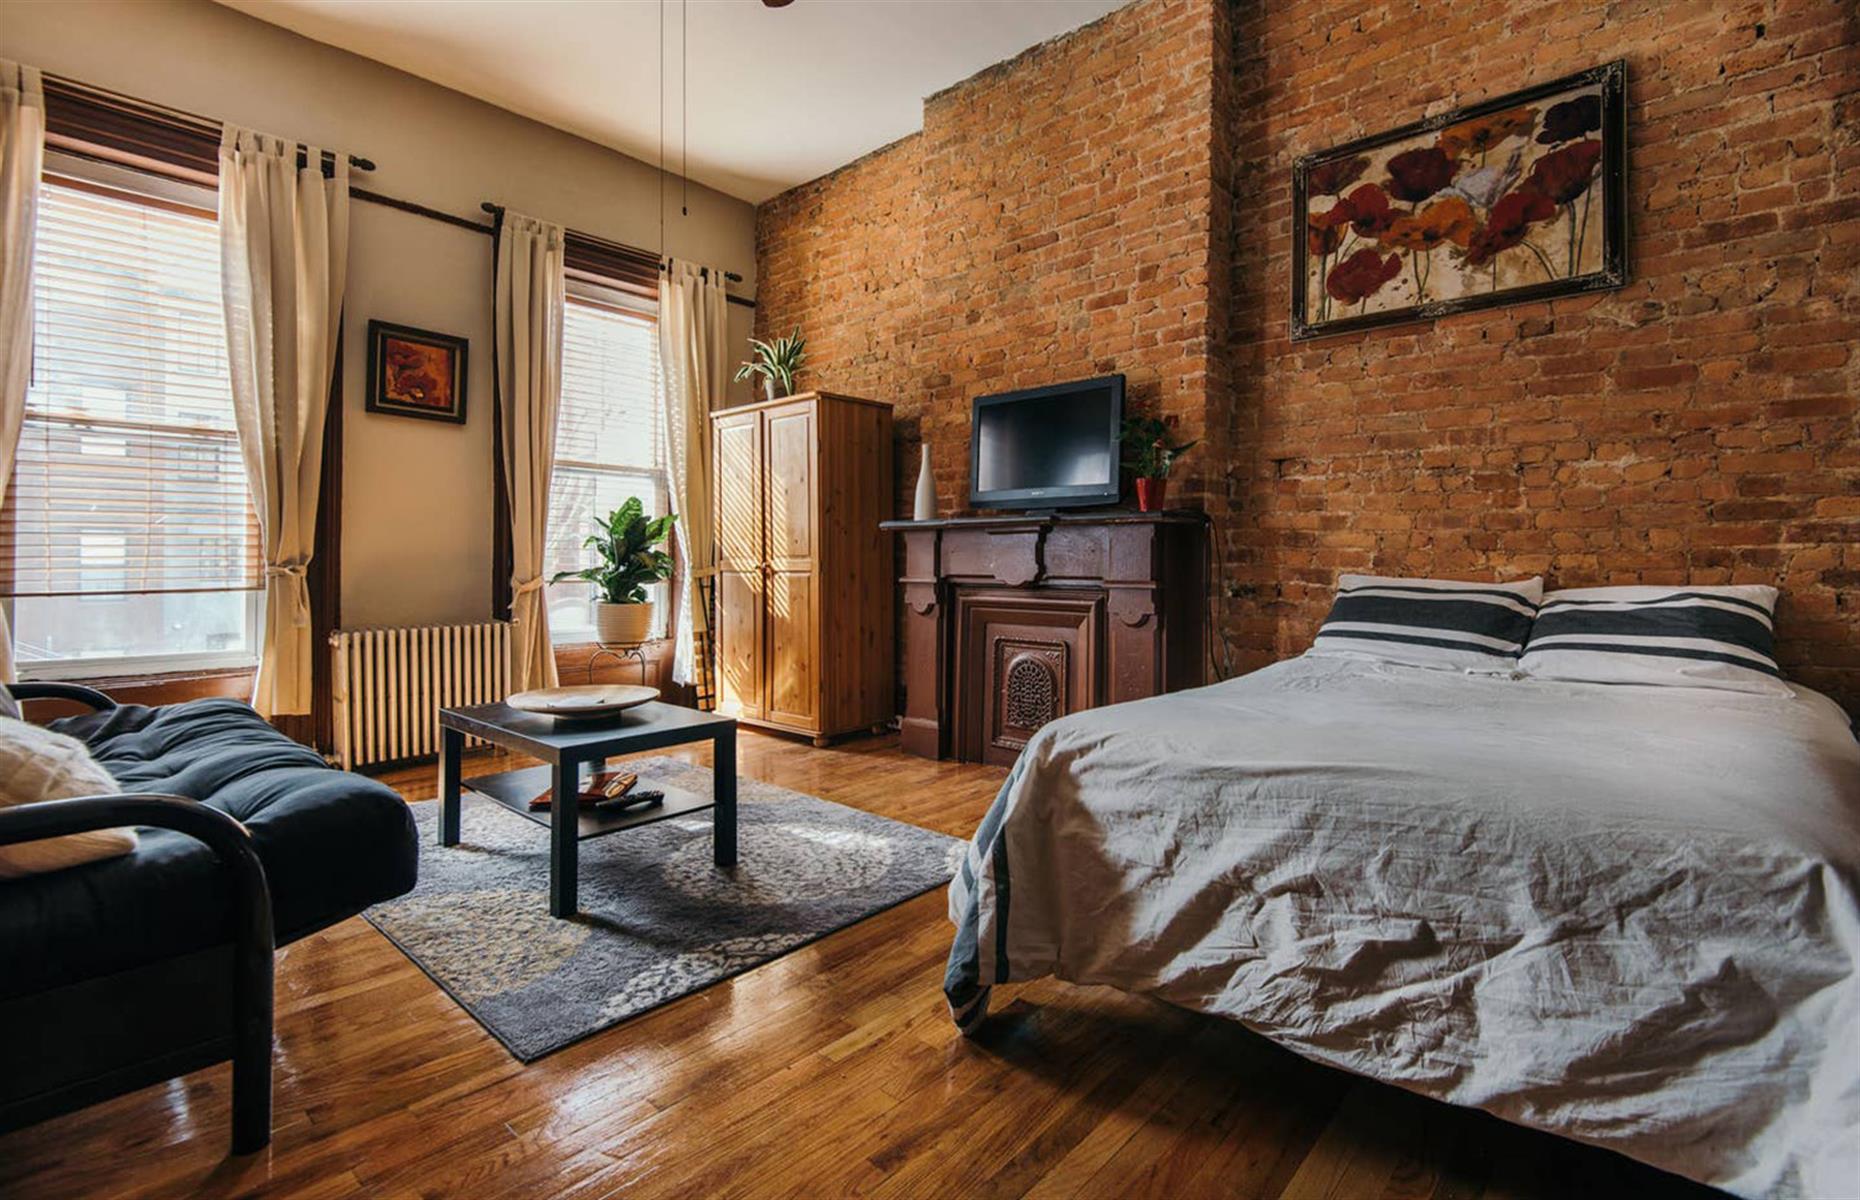 <p>Nothing's more authentically <a href="https://www.nycgo.com/">New York</a> than staying in an original brownstone loft with an exposed brick wall. Located in one of Brooklyn's most historic areas, home to many authentic brownstone buildings, <a href="https://www.airbnb.co.uk/rooms/17339881">the studio</a> is surrounded by great restaurants and bars (opening times may vary due to COVID-19) and is within easy reach of subway lines A and G that connect Brooklyn with Manhattan. The studio also has a beautifully renovated bathroom and kitchen with stainless steel appliances and can be booked for $120 per night.</p>